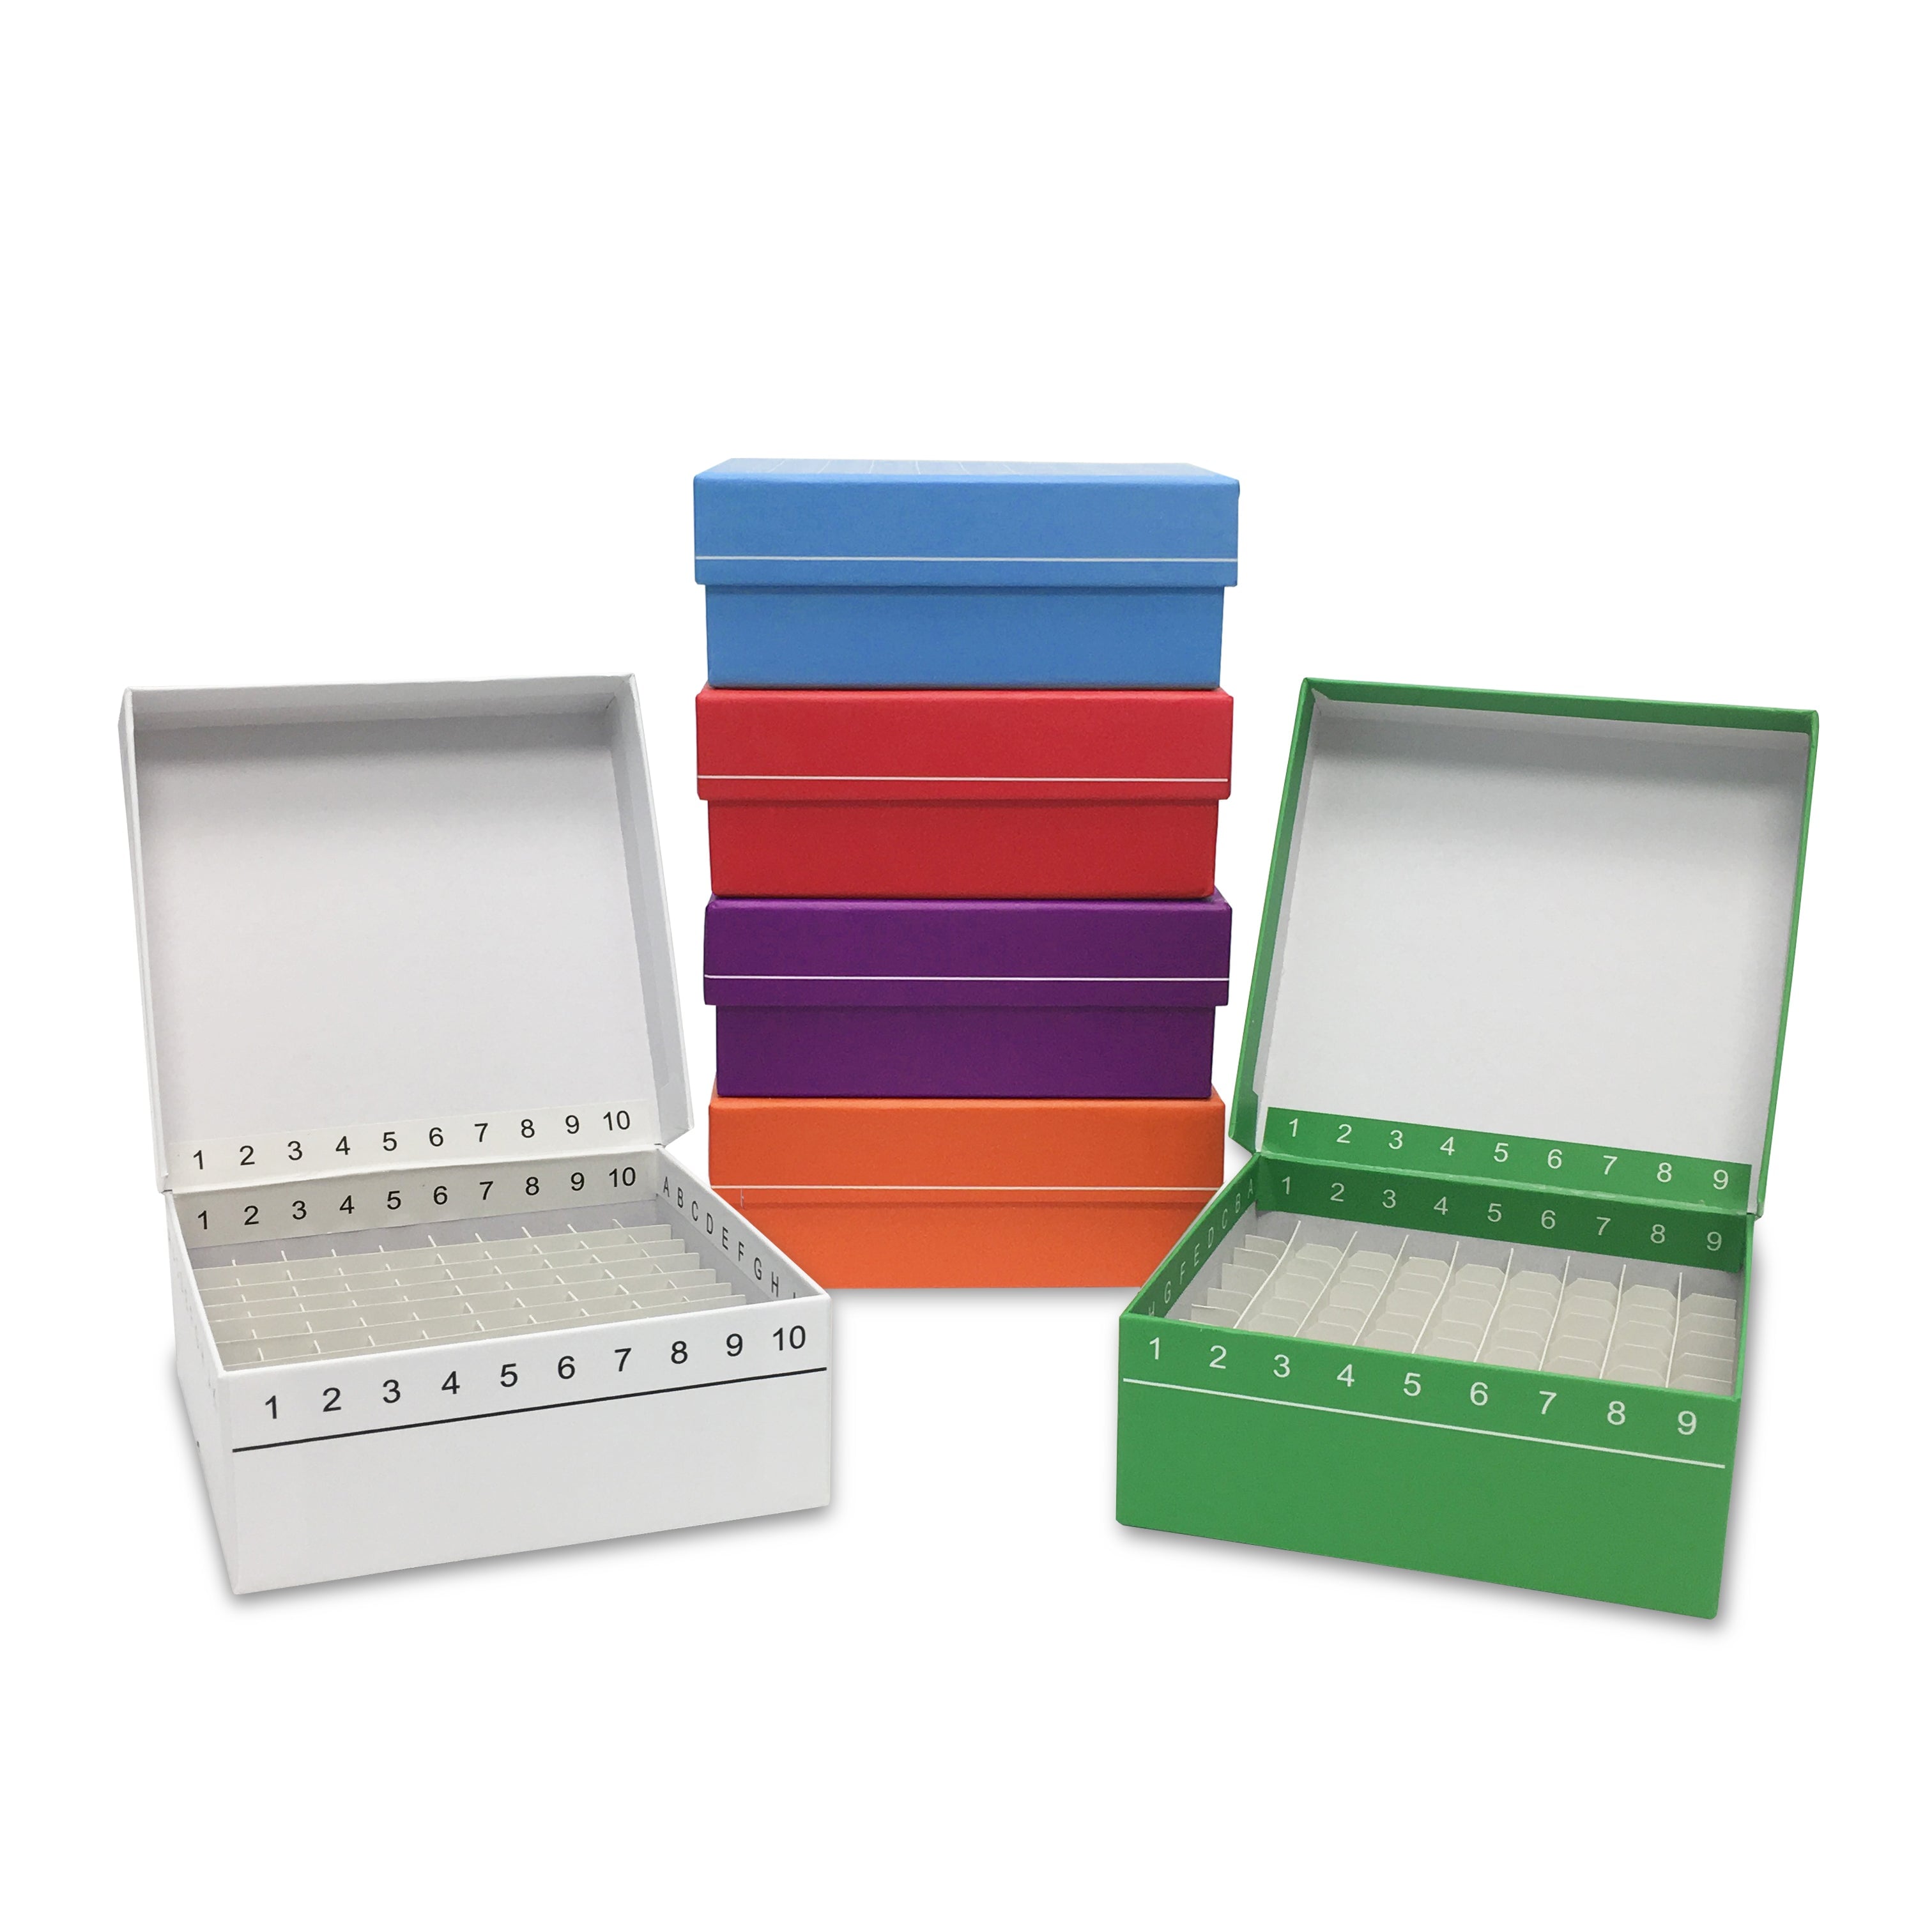 MTC Bio R2781-R FlipTop™ Carboard freezer box w/ attached hinged lid, 81-place, red, 5/pk